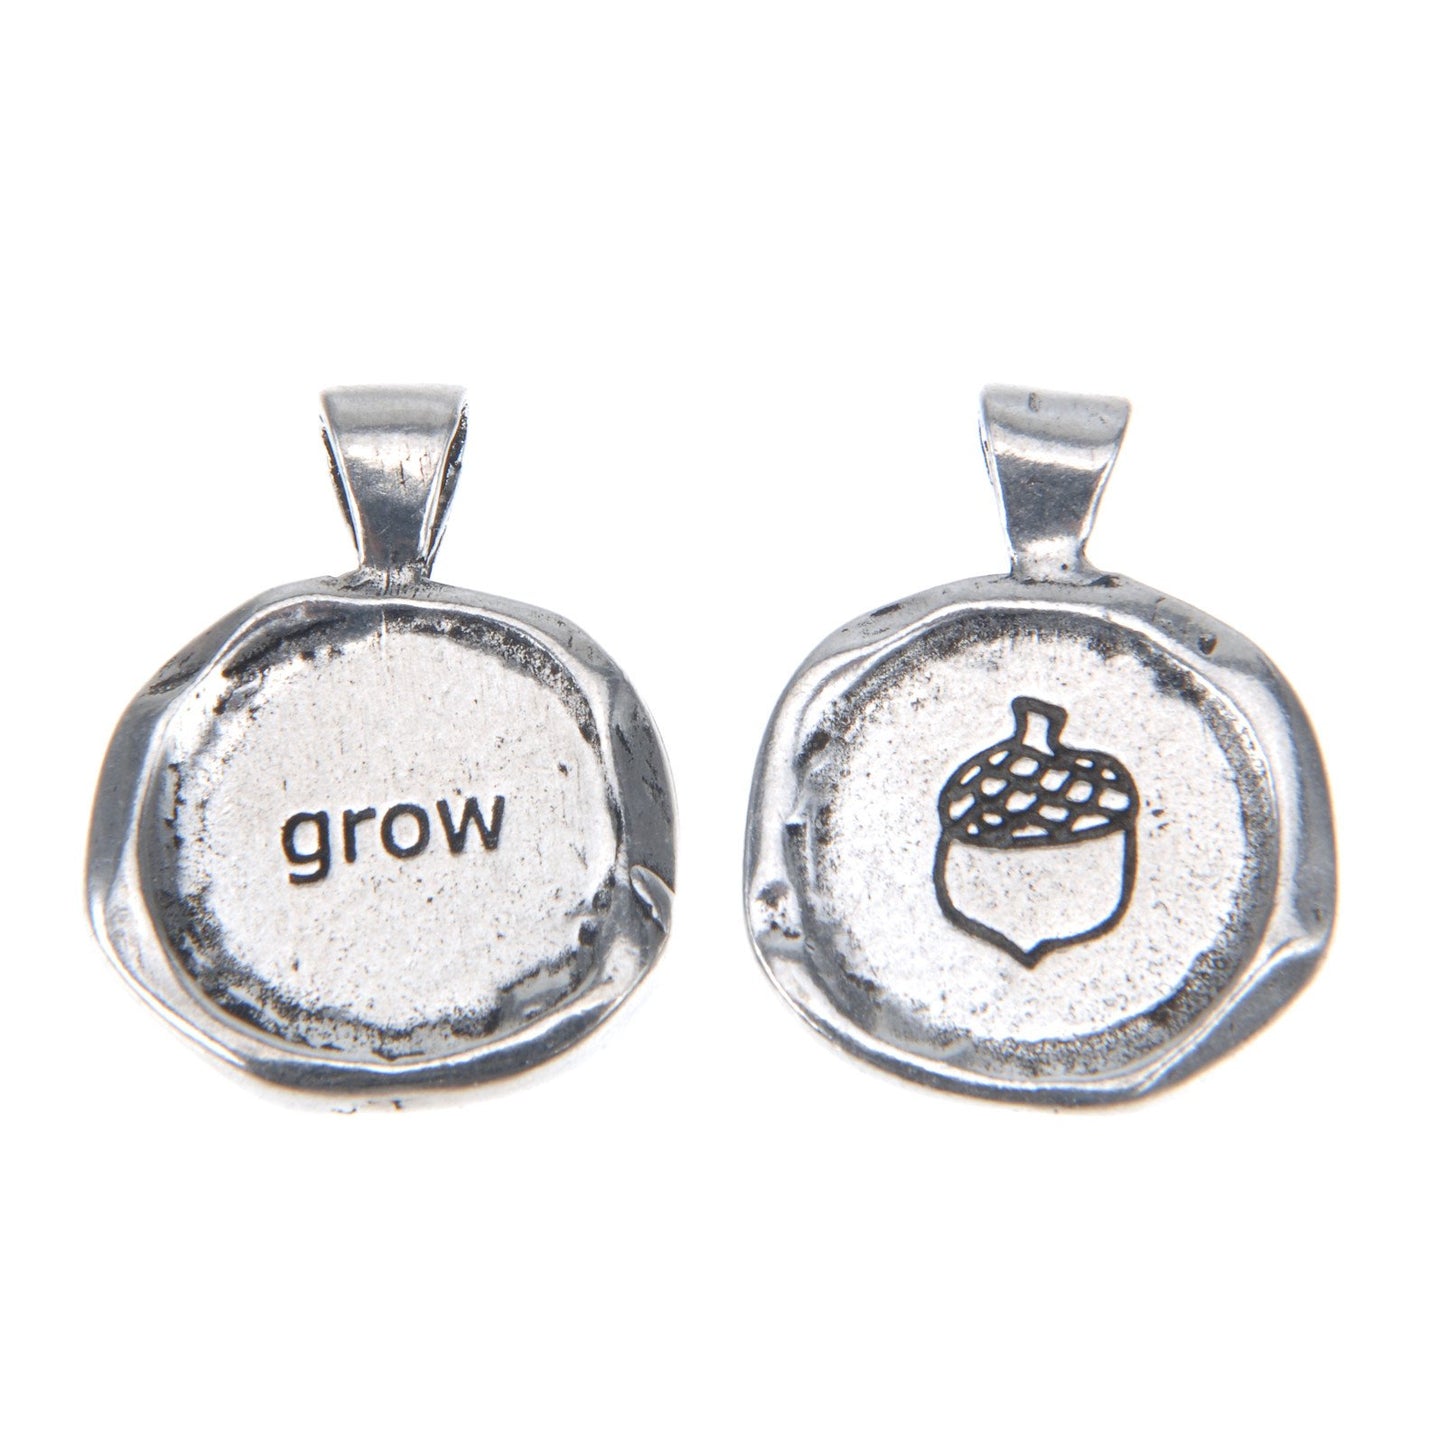 Grow Wax Seal front and back